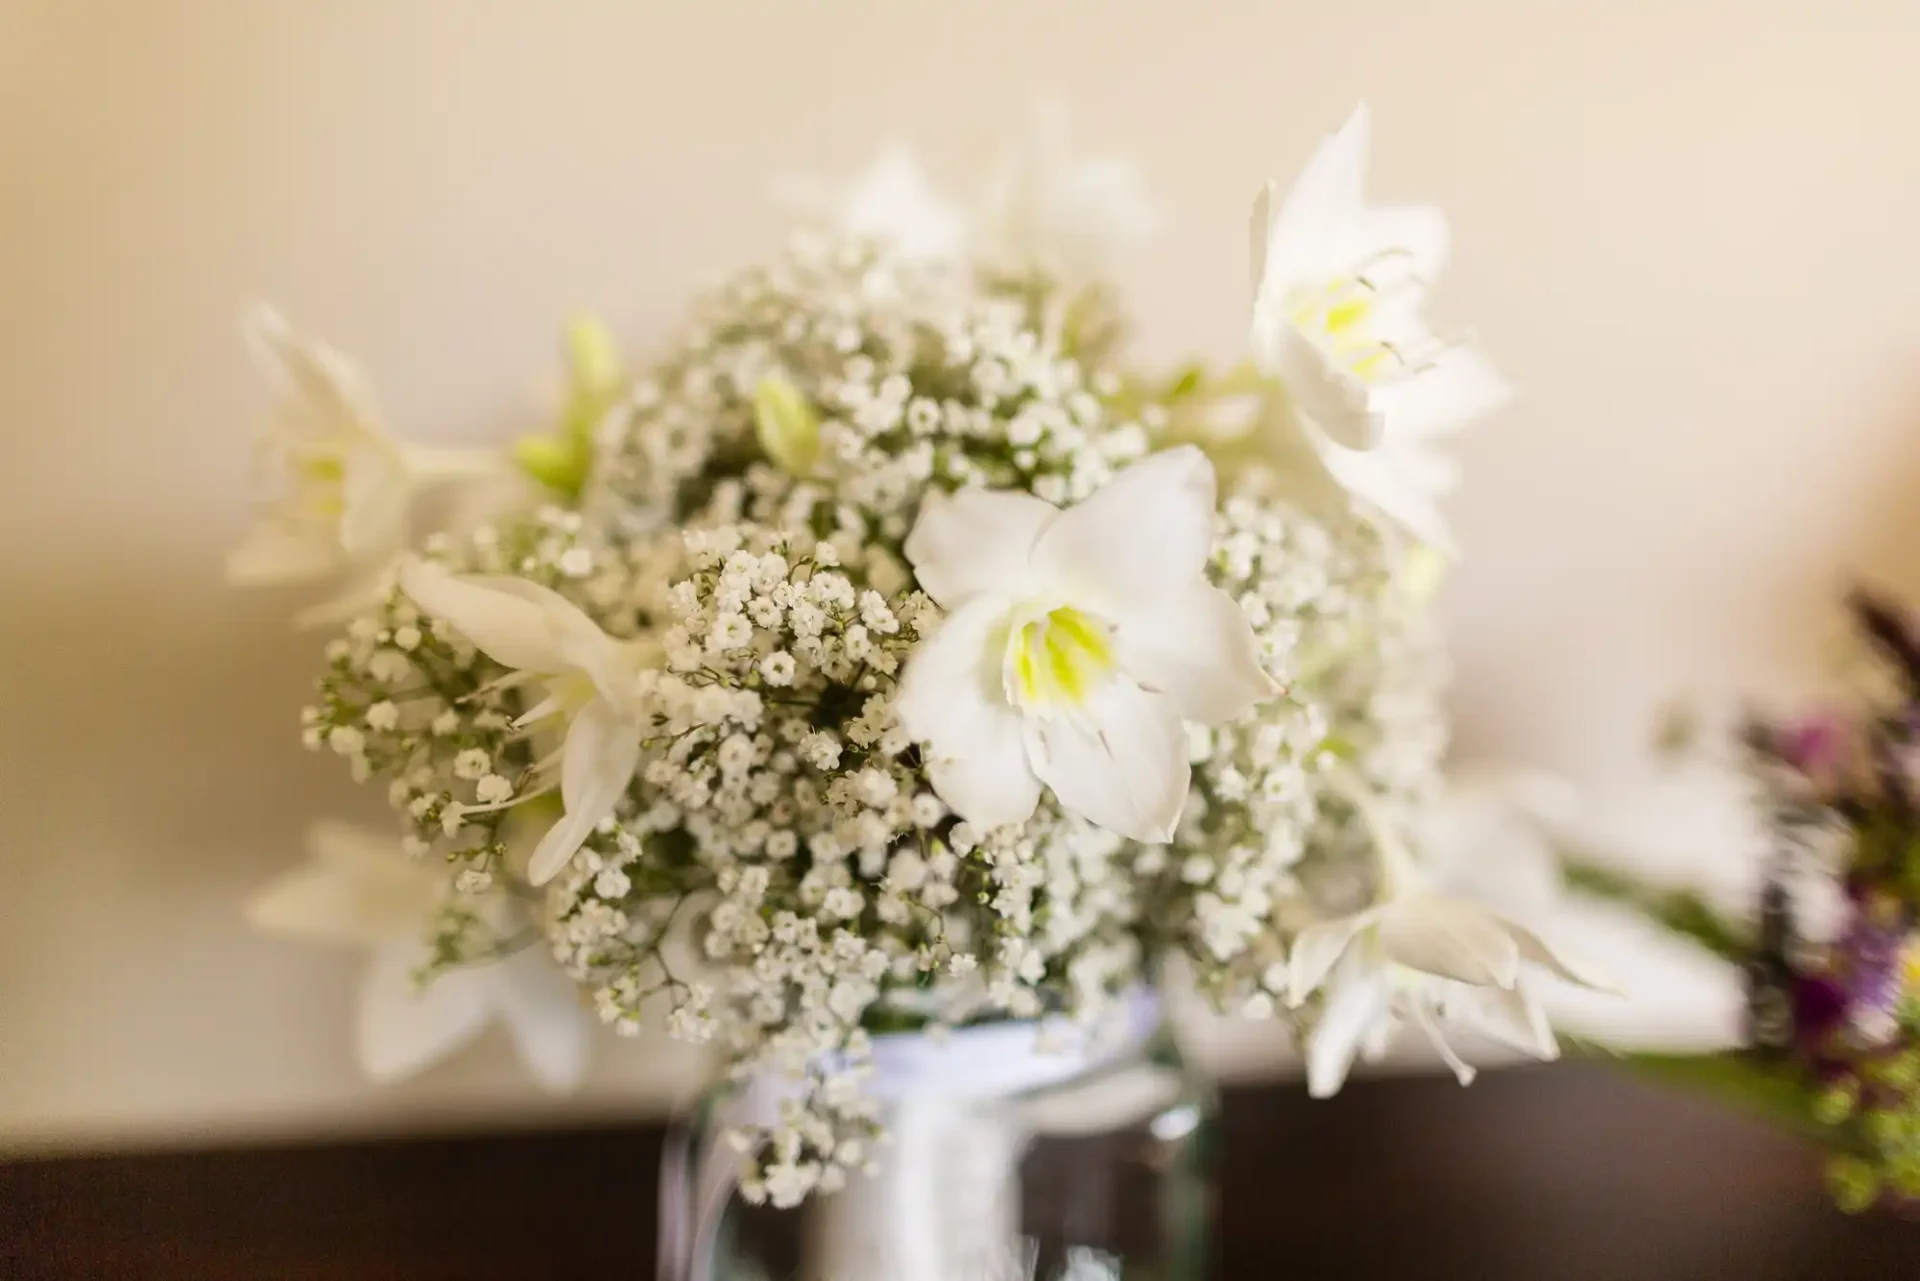 A close-up of a bouquet featuring white daffodils and baby's breath in a glass vase on a wooden surface.